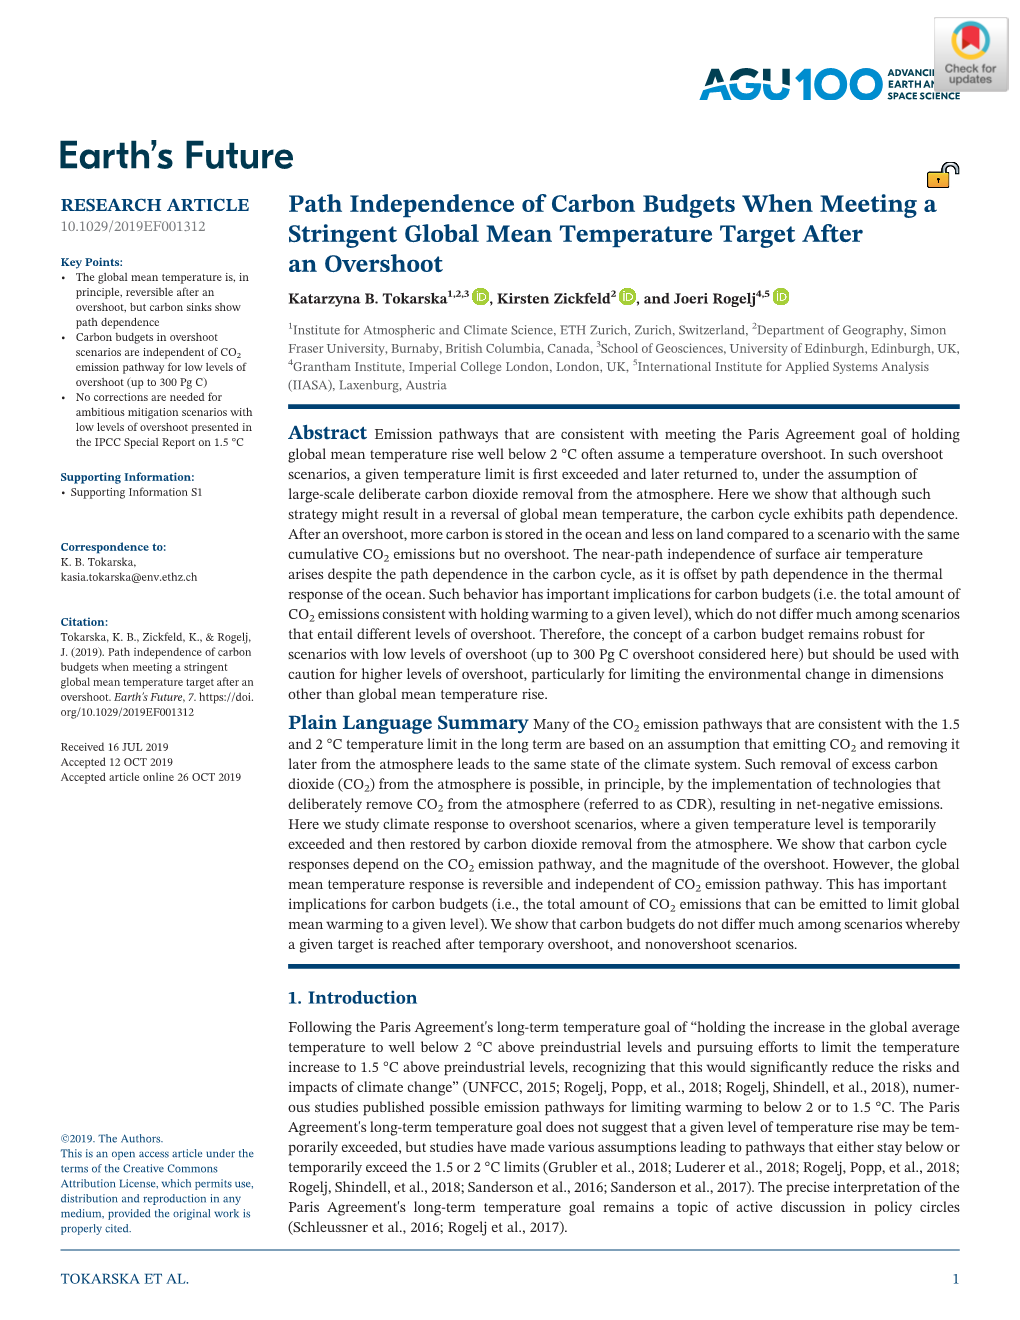 Path Independence of Carbon Budgets When Meeting a Stringent